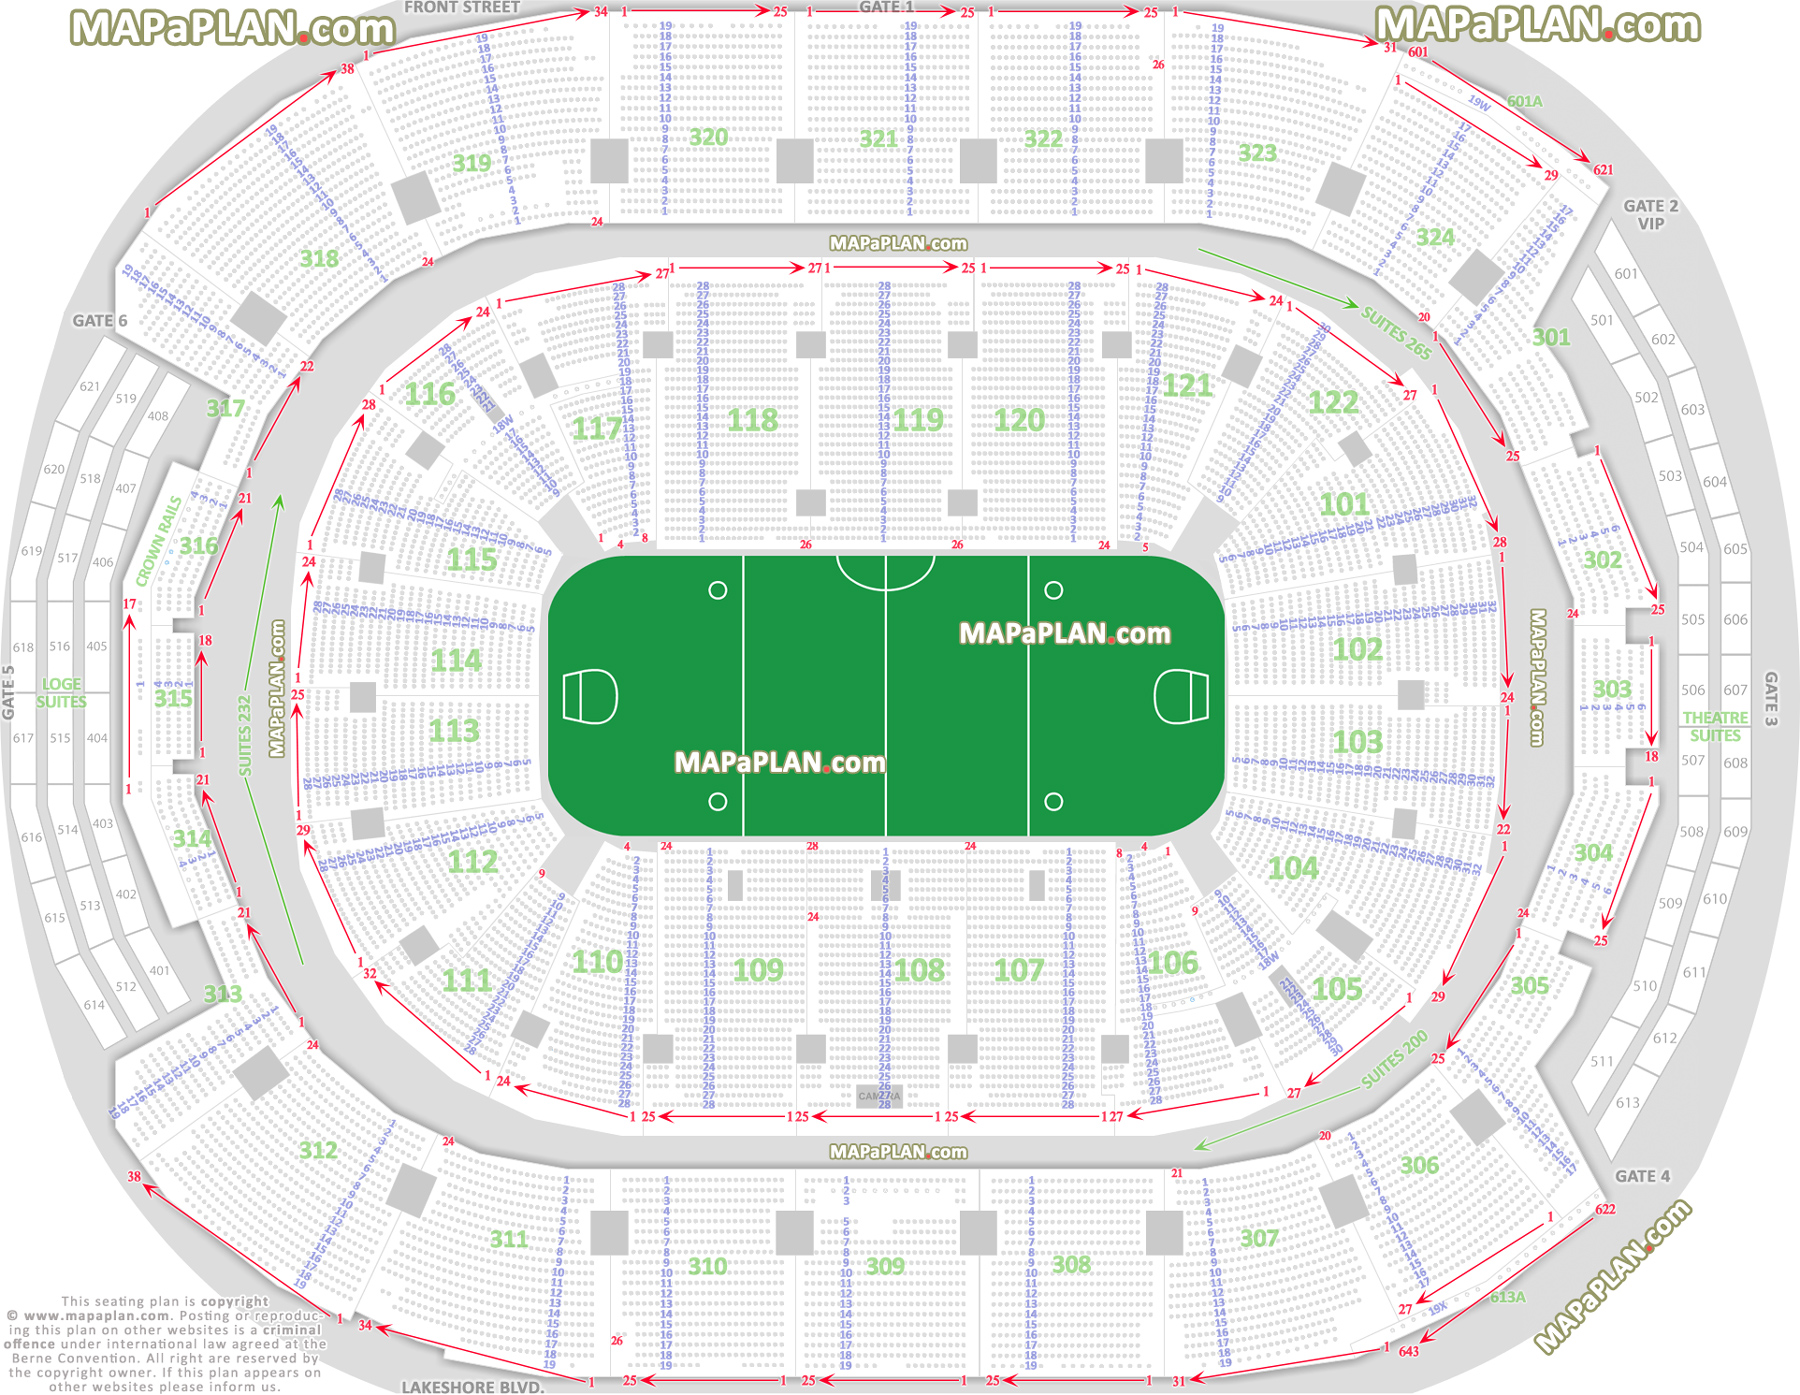 Toronto Air Canada Centre Seat Row Numbers Detailed Seating Chart Mapaplan Com